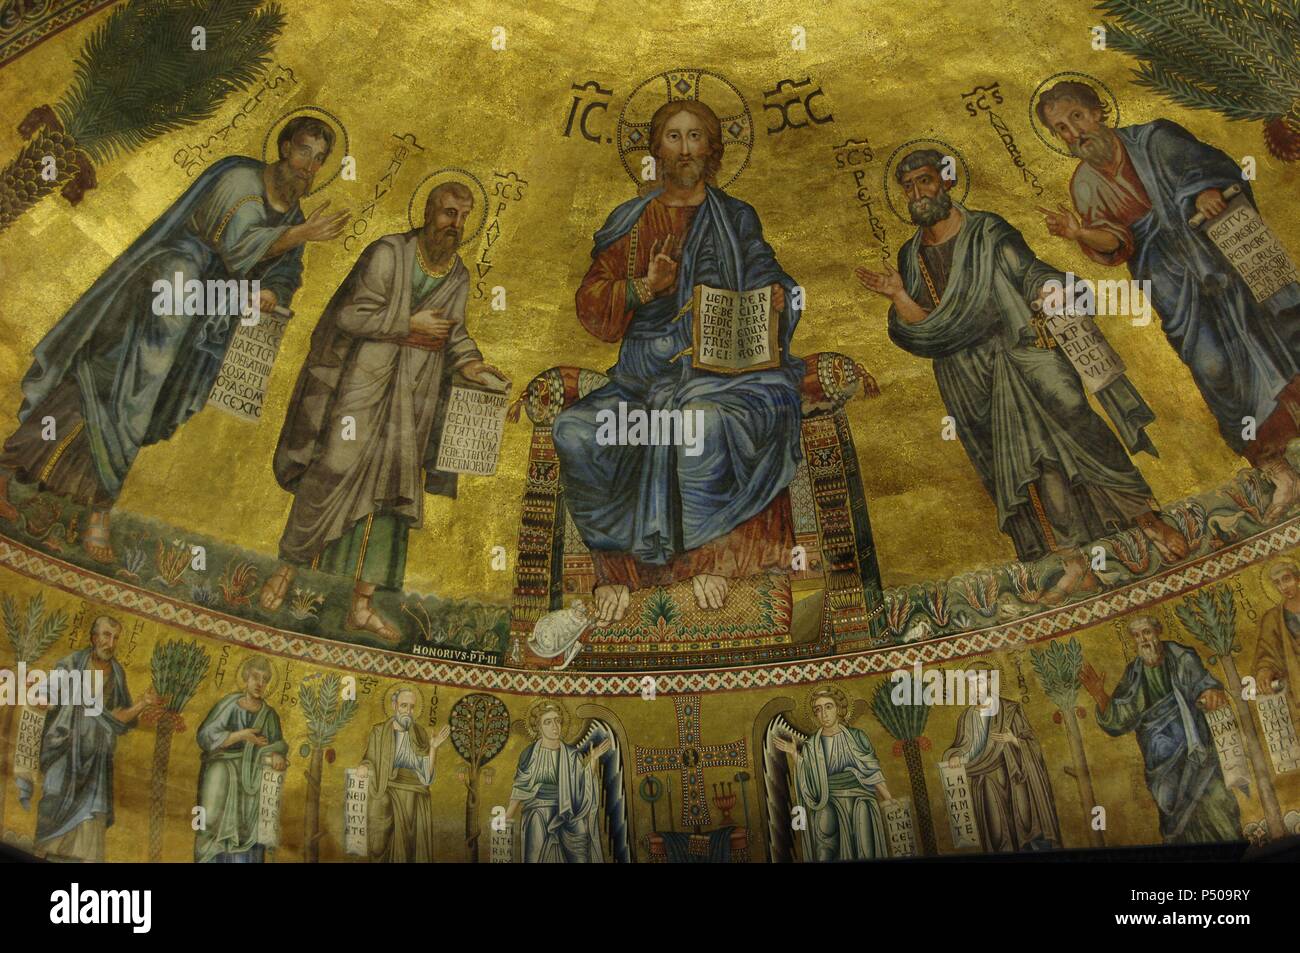 Italy. Rome. Basilica of St. Paul Outside the Walls. Mosaic of apse. Made by a Venetian artist. Christ is flanked by teh Apostles Peter, Paul, Andrew and Luke.19th century reconstruction (after fire 1823), of the 13th century original. Stock Photo